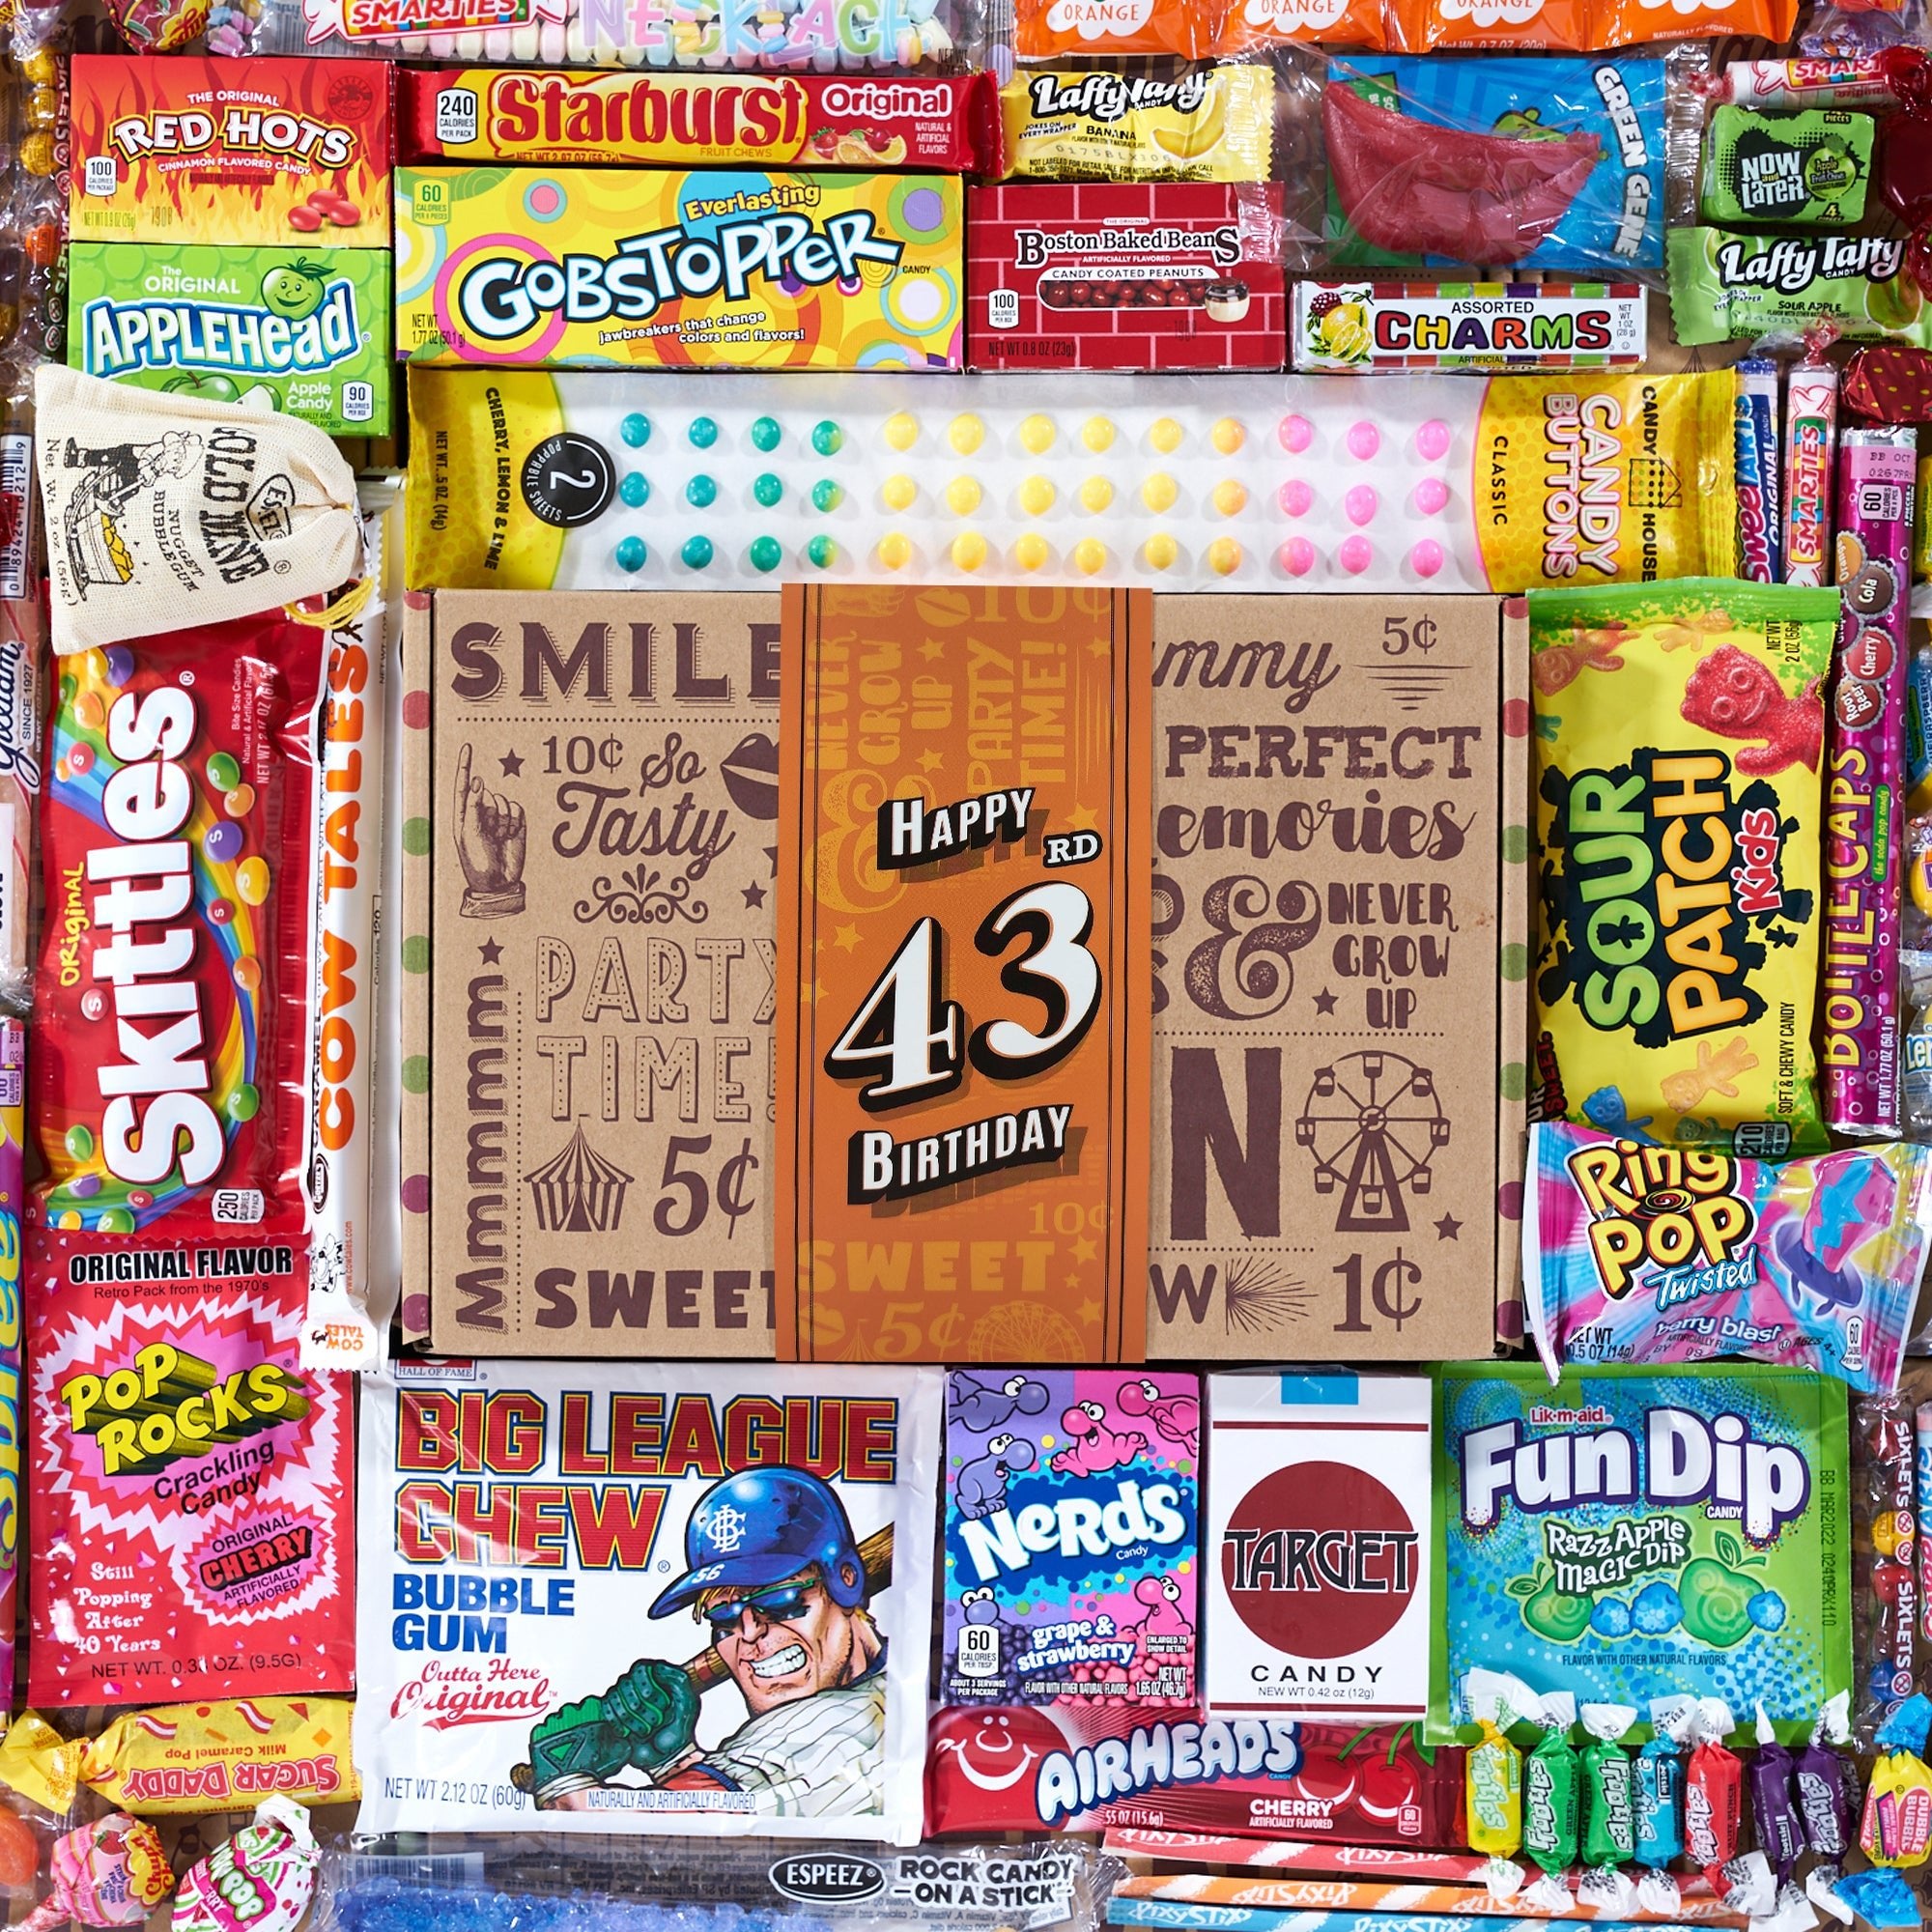 43rd Birthday Retro Candy Gift - Vintage Candy Co.